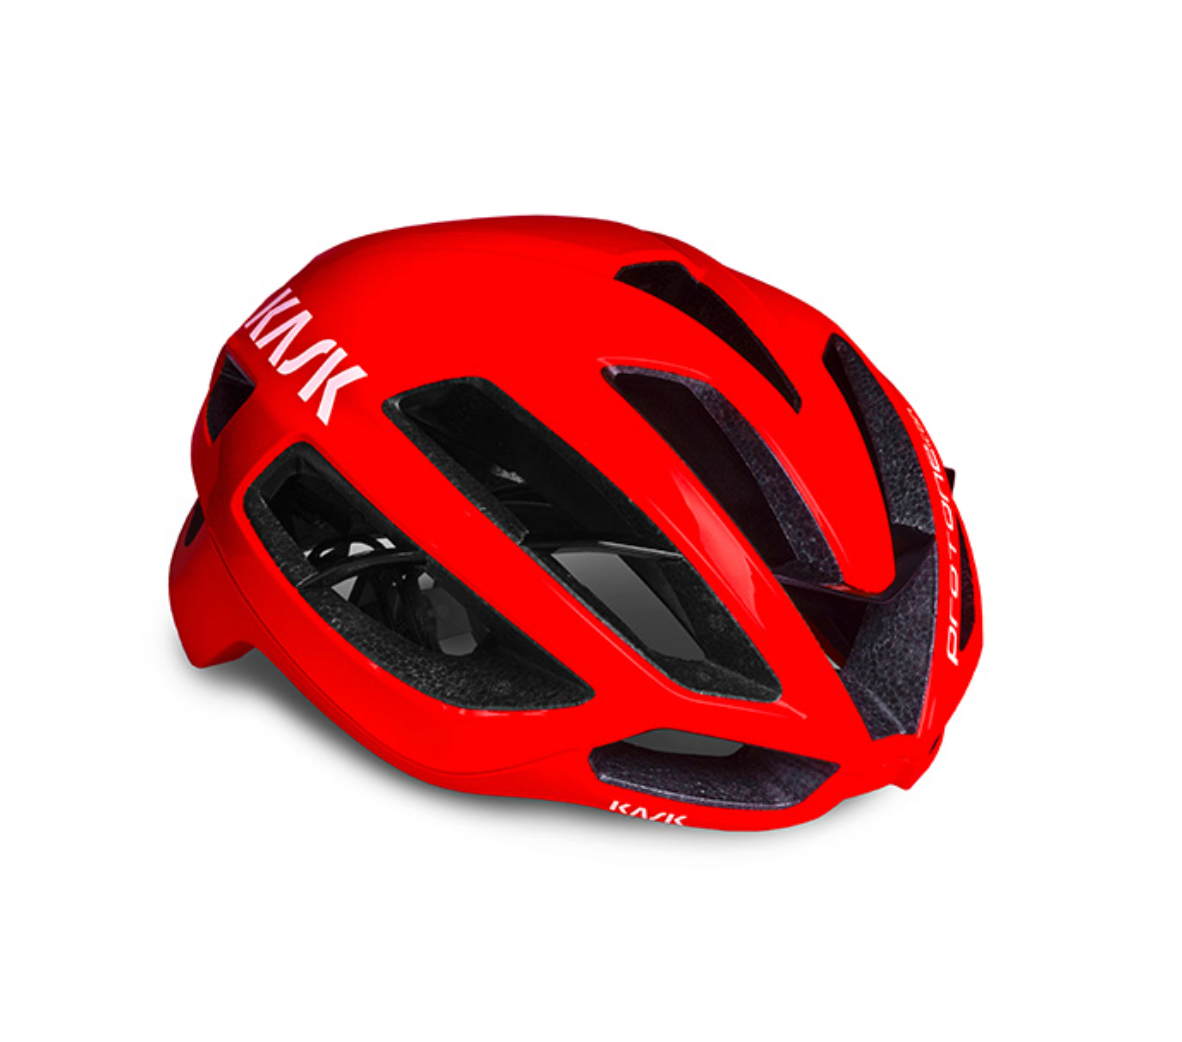 KASK Protone ICON Bicycle Helmet - Red - Medium Sporting Goods > Cycling > Helmets & Protective Gear > Helmets Full Catalog KASK